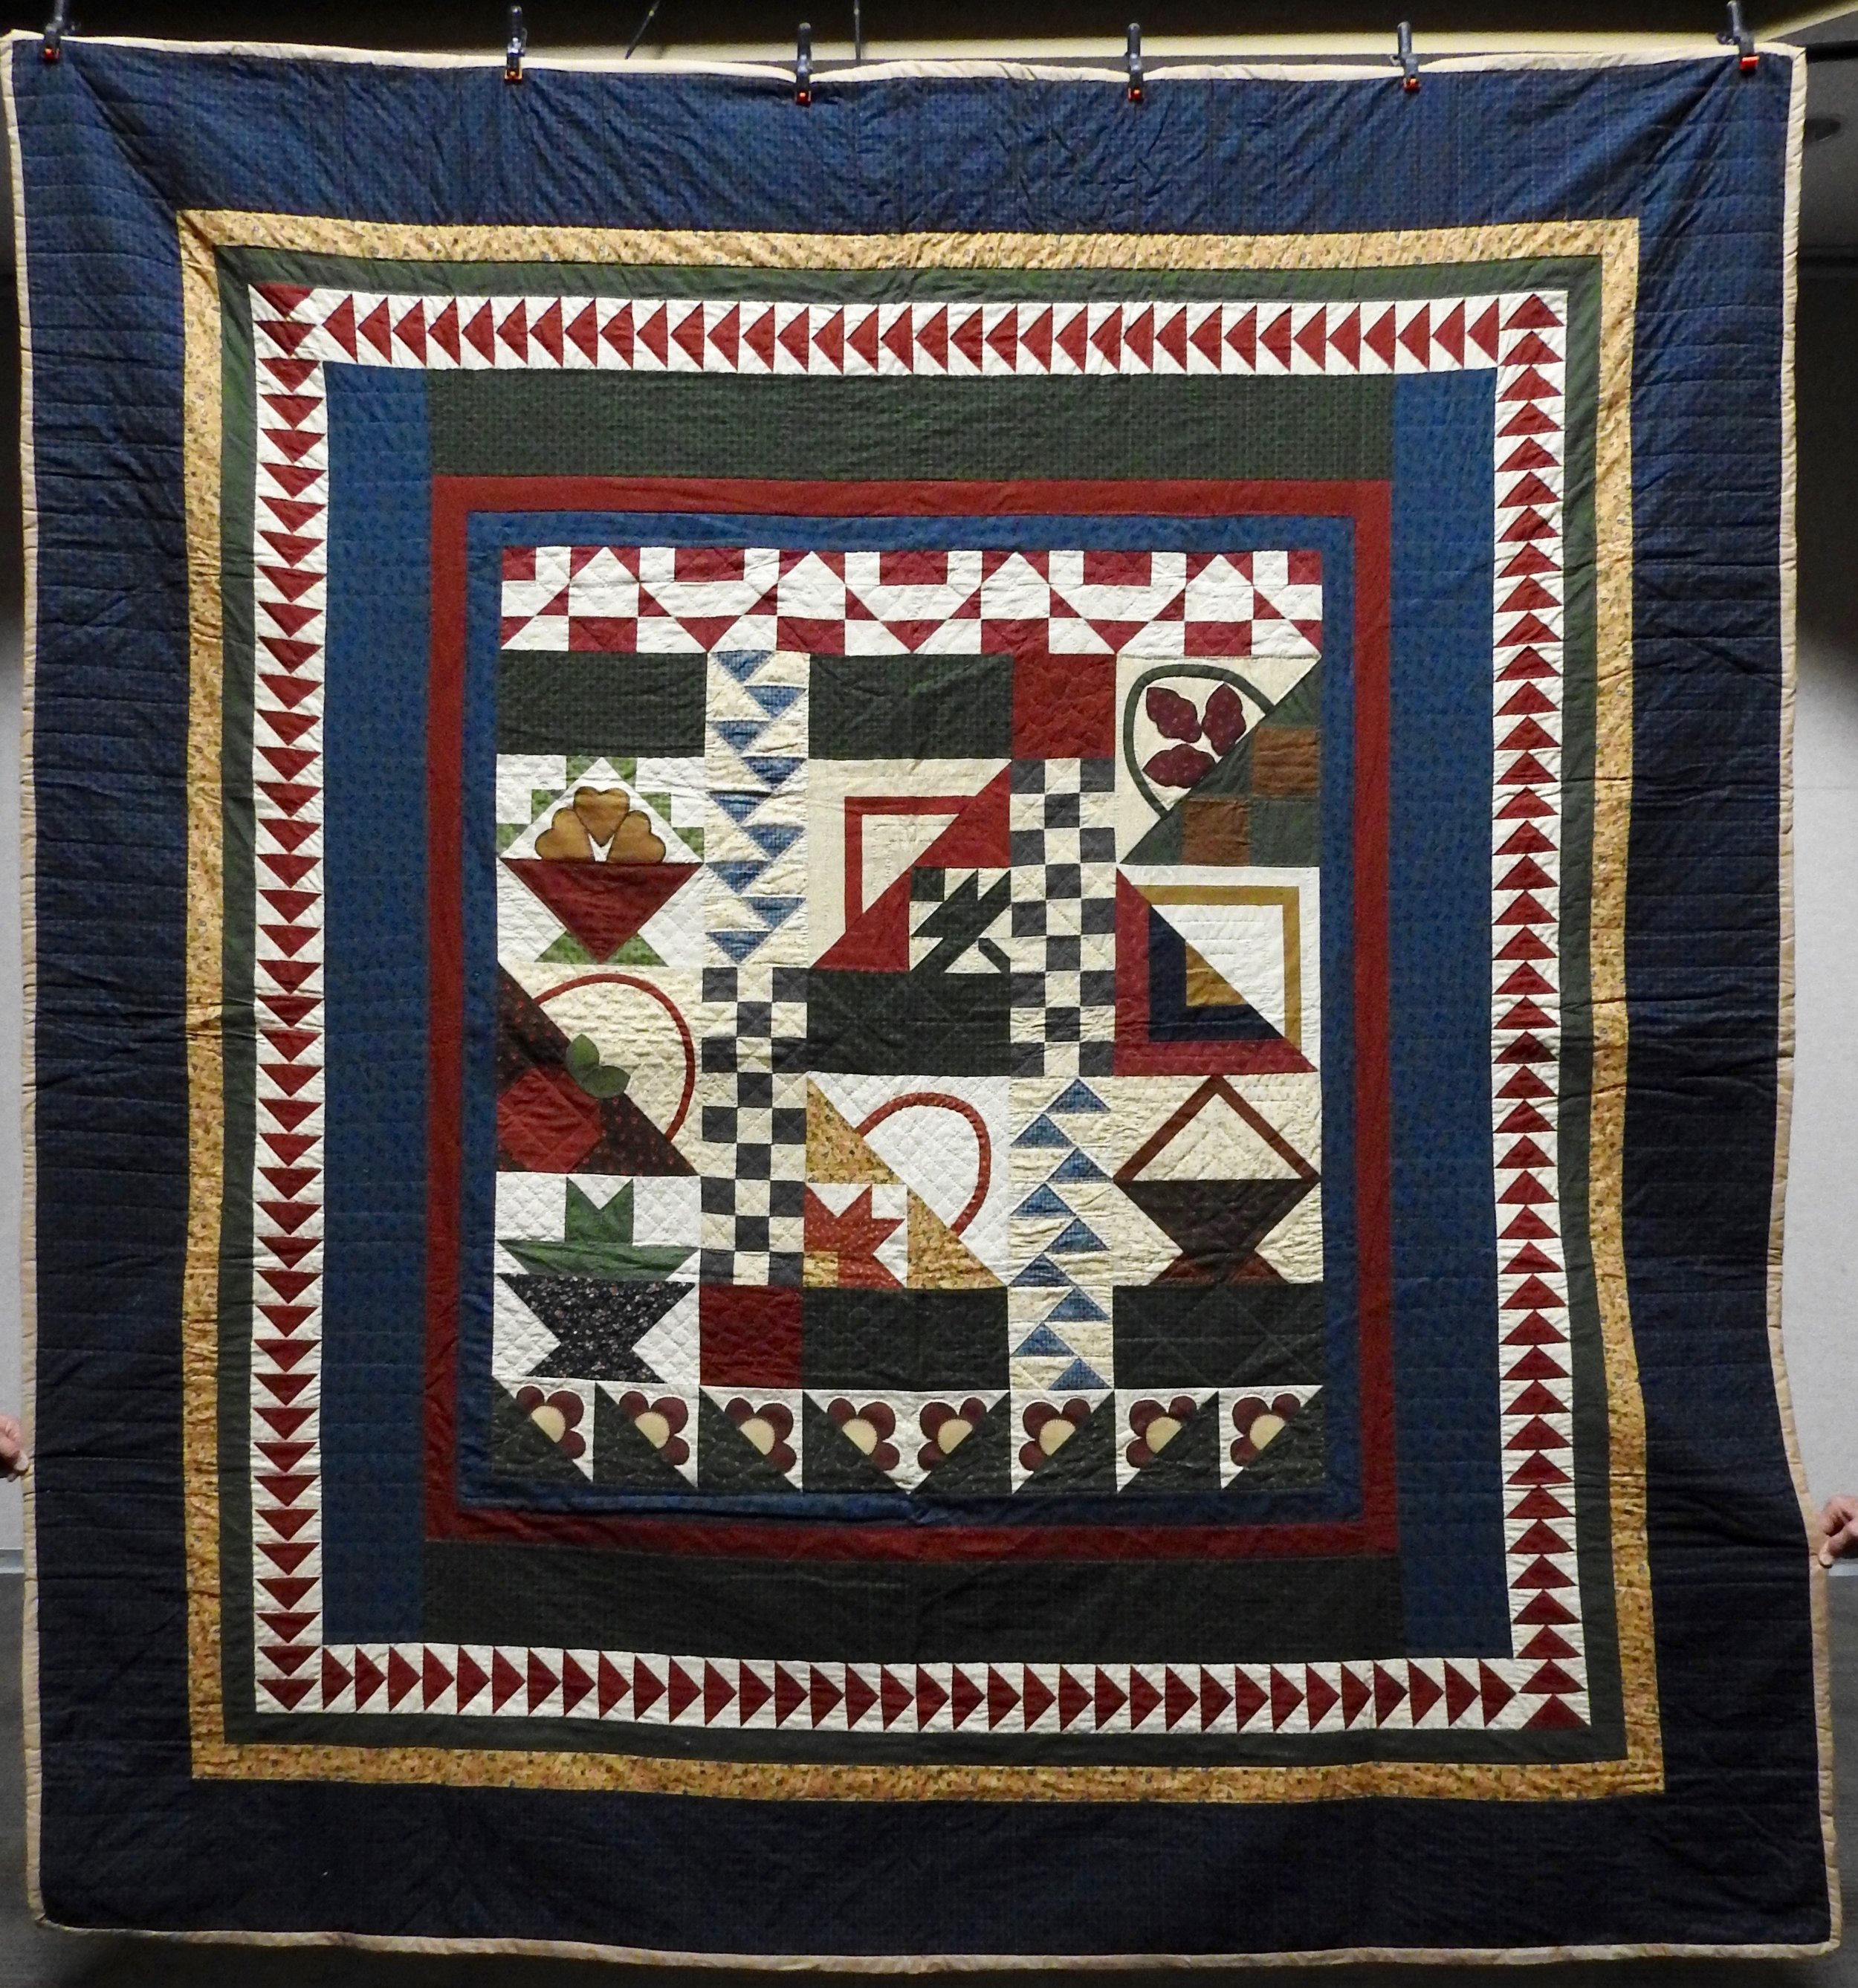 Early American Sampler, Pieced &amp; Appliquéd, Hand Quilted, (cotton batting) donated by Howard-Miami Mennonite Church, 100 x 108”